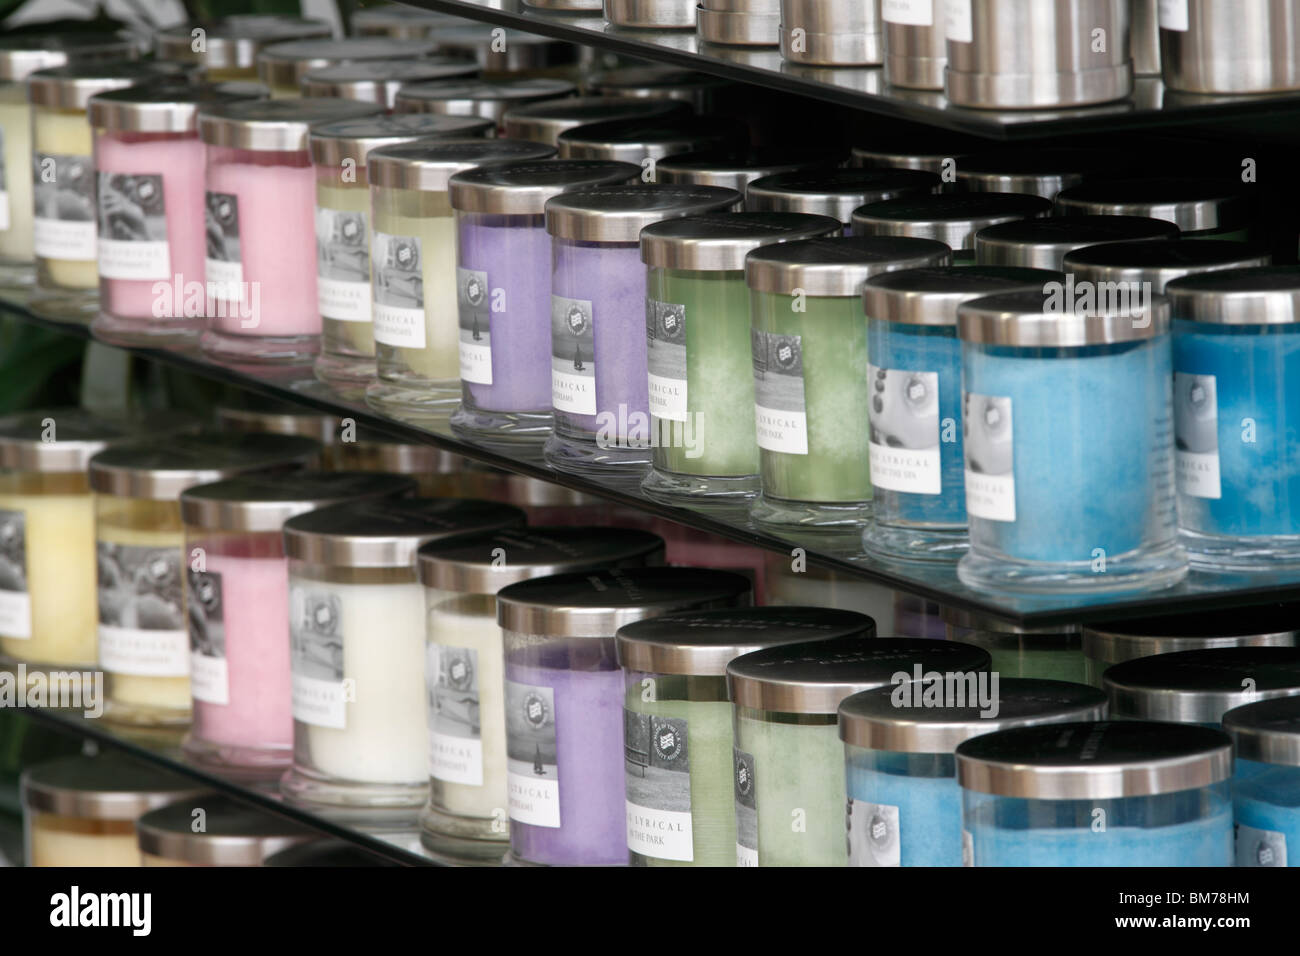 Wax Lyrical selection of scented candles Brookfields garden Centre, Nottingham Stock Photo